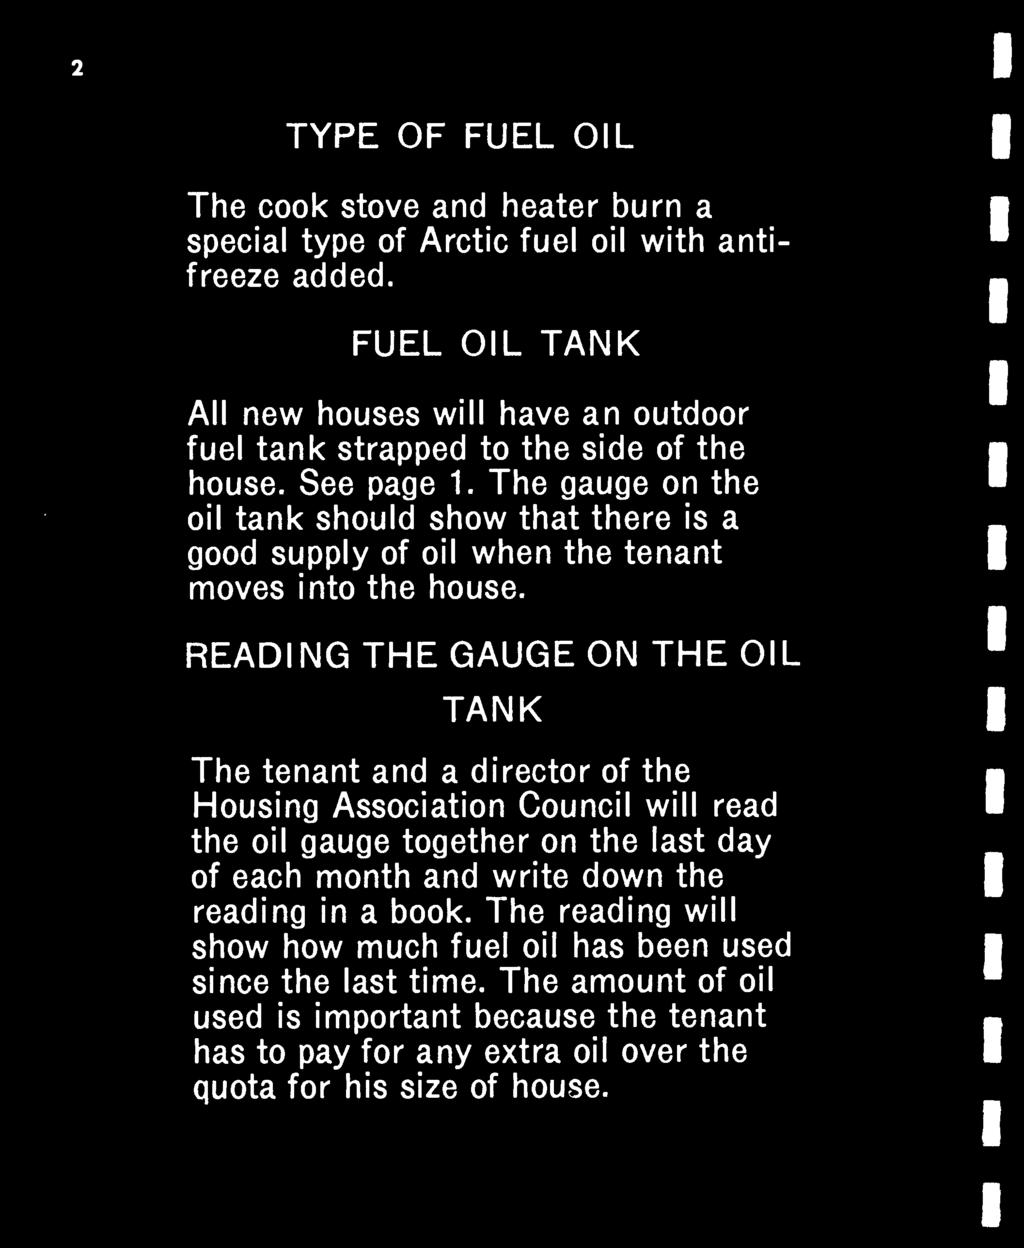 2 TYPE OF FUEL OIL The cook stove and heater burn a special type of Arctic fuel oil with antifreeze added.